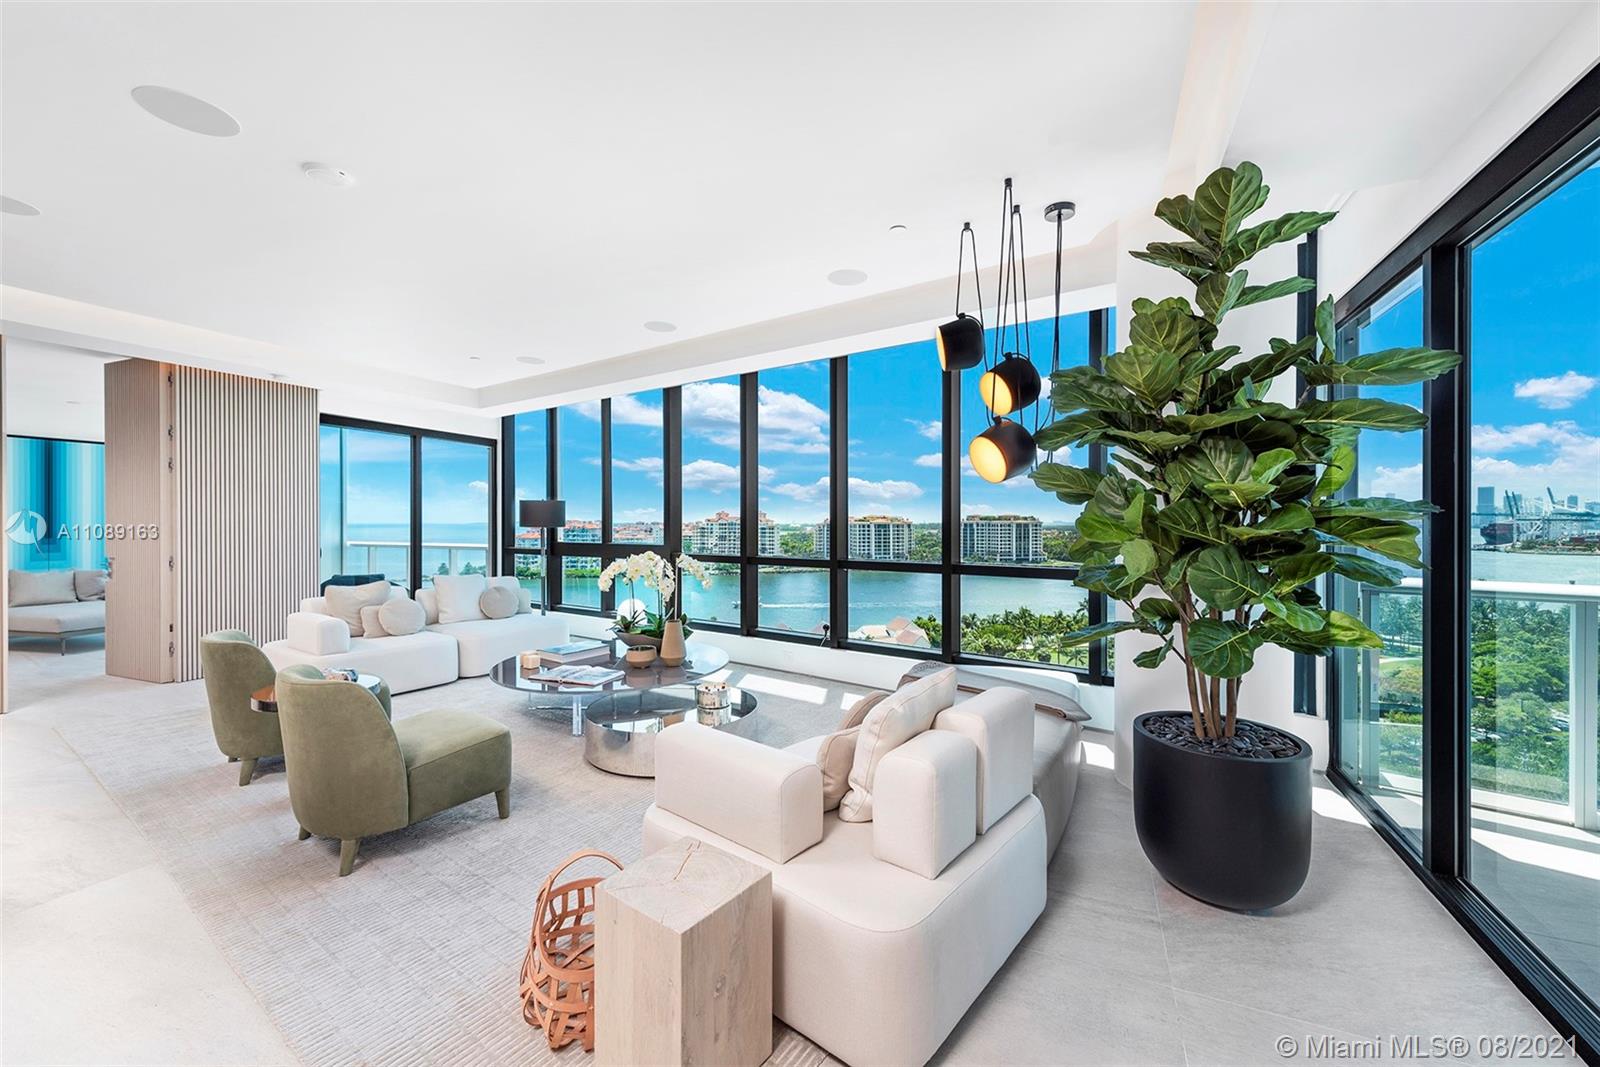 Every single detail in this one-of-a-kind 3,000 SF custom built, combined SW corner residence is meticulously designed blending wonderful panoramic vistas with the finest interior appointments. Impressive 32' wide living room perched above the Atlantic, Biscayne Bay and South Pointe Park, offers a full panorama from the ocean to Miami's Skyline sunsets. Custom features include Ornare kitchen+WI closets, Architectural Lighting, Dornbracht/Hansgohe baths, book-matched CalcuttaGold, white oak lower wall, Lutron/Control4 technology. Grand primary suite features its own terrace, louver crowned California king, sitting-room/spa. Discover an unparalleled lifestyle Continuum  offers its residences on an unprecedented 12.5 acre beachfront oasis at the southernmost tip of the island of Miami Beach.